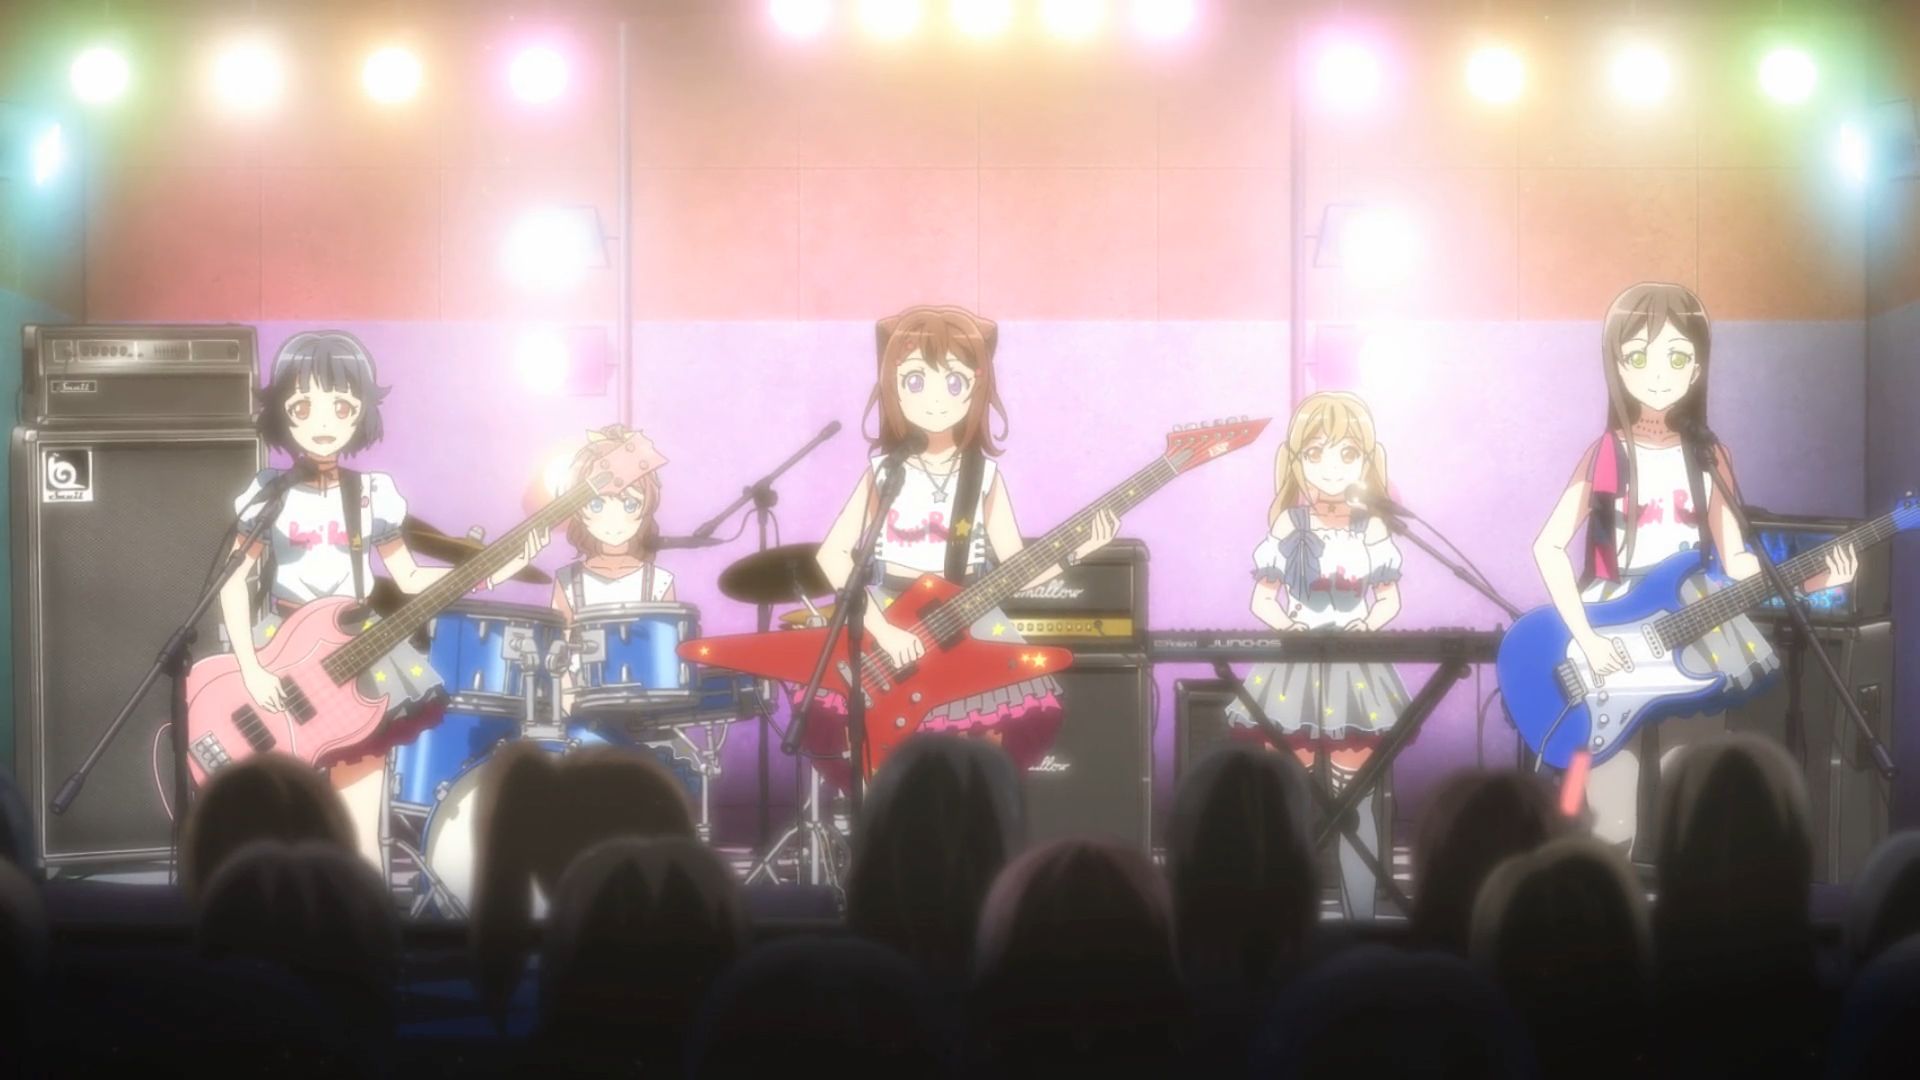 BanG Dream! is one of the best anime series with girl idols. 